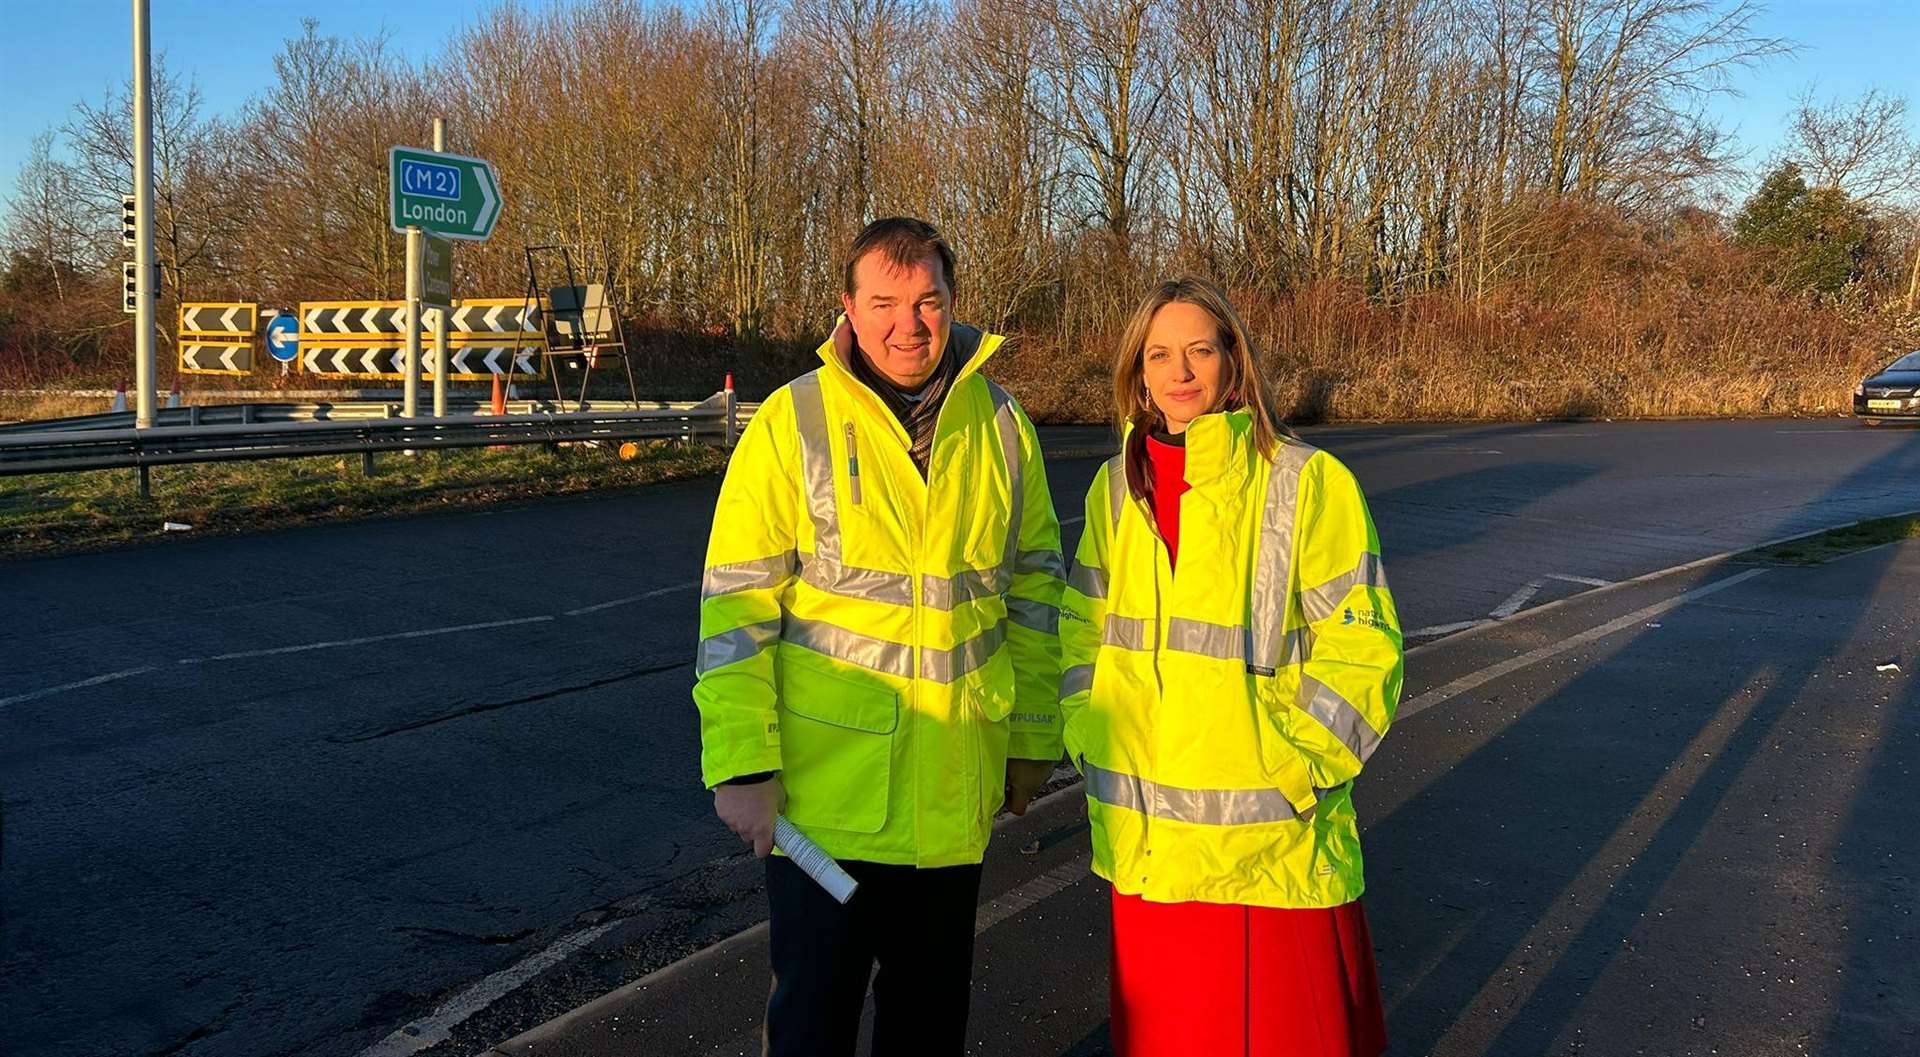 Helen Whately at a recent meeting with the roads minister Guy Opperman, to discuss the works at Brenley Corner